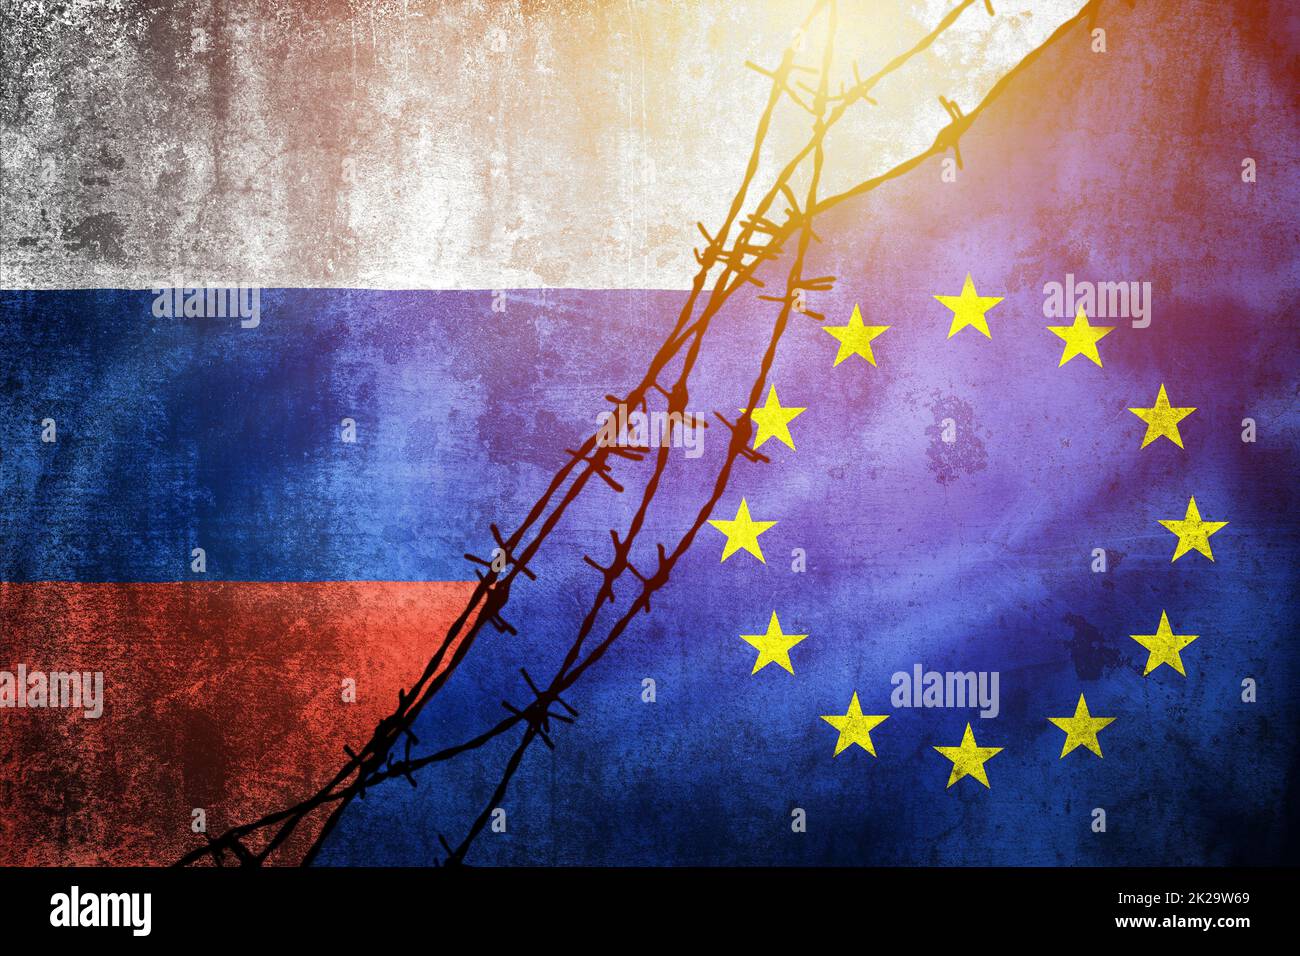 Grunge flags of Russia and European Union divided by barb wire sun haze illustration Stock Photo